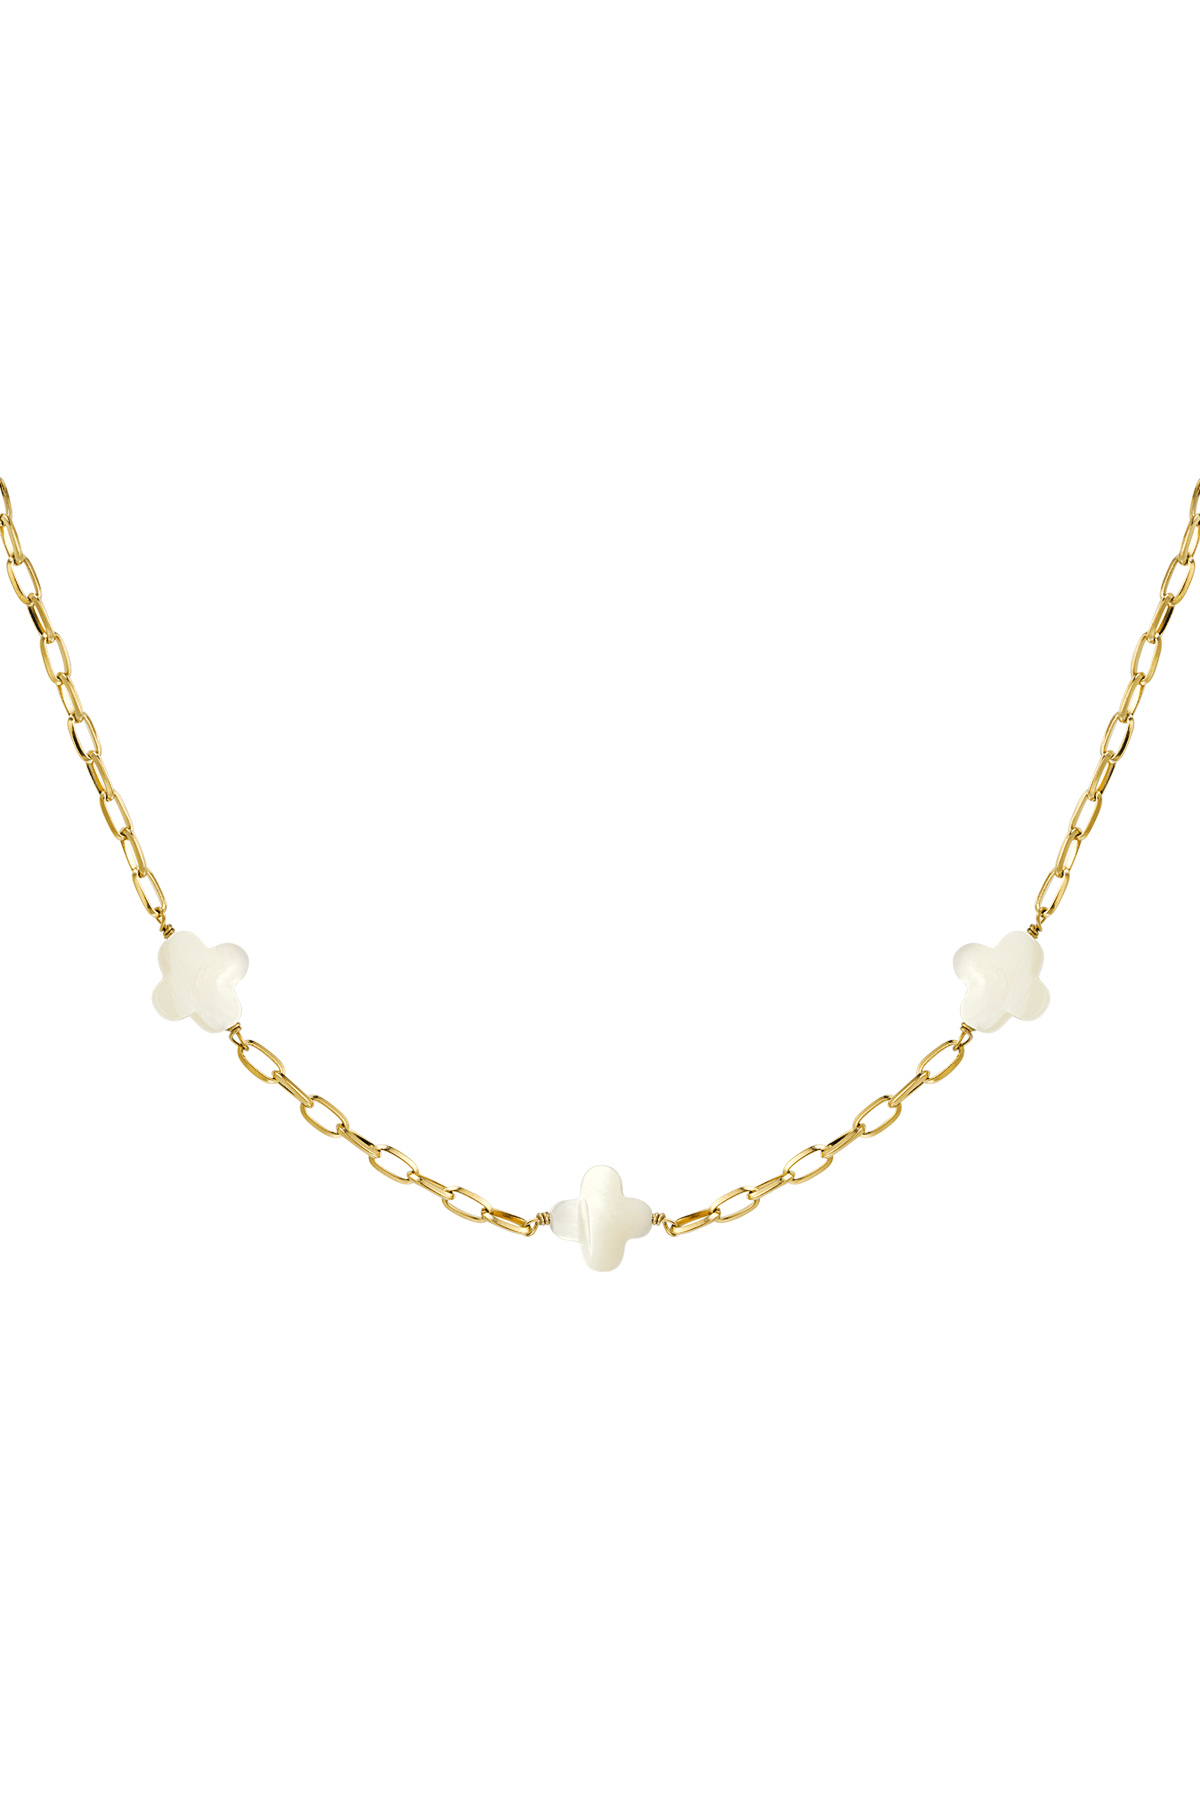 Necklace seashell clovers - Gold Stainless Steel